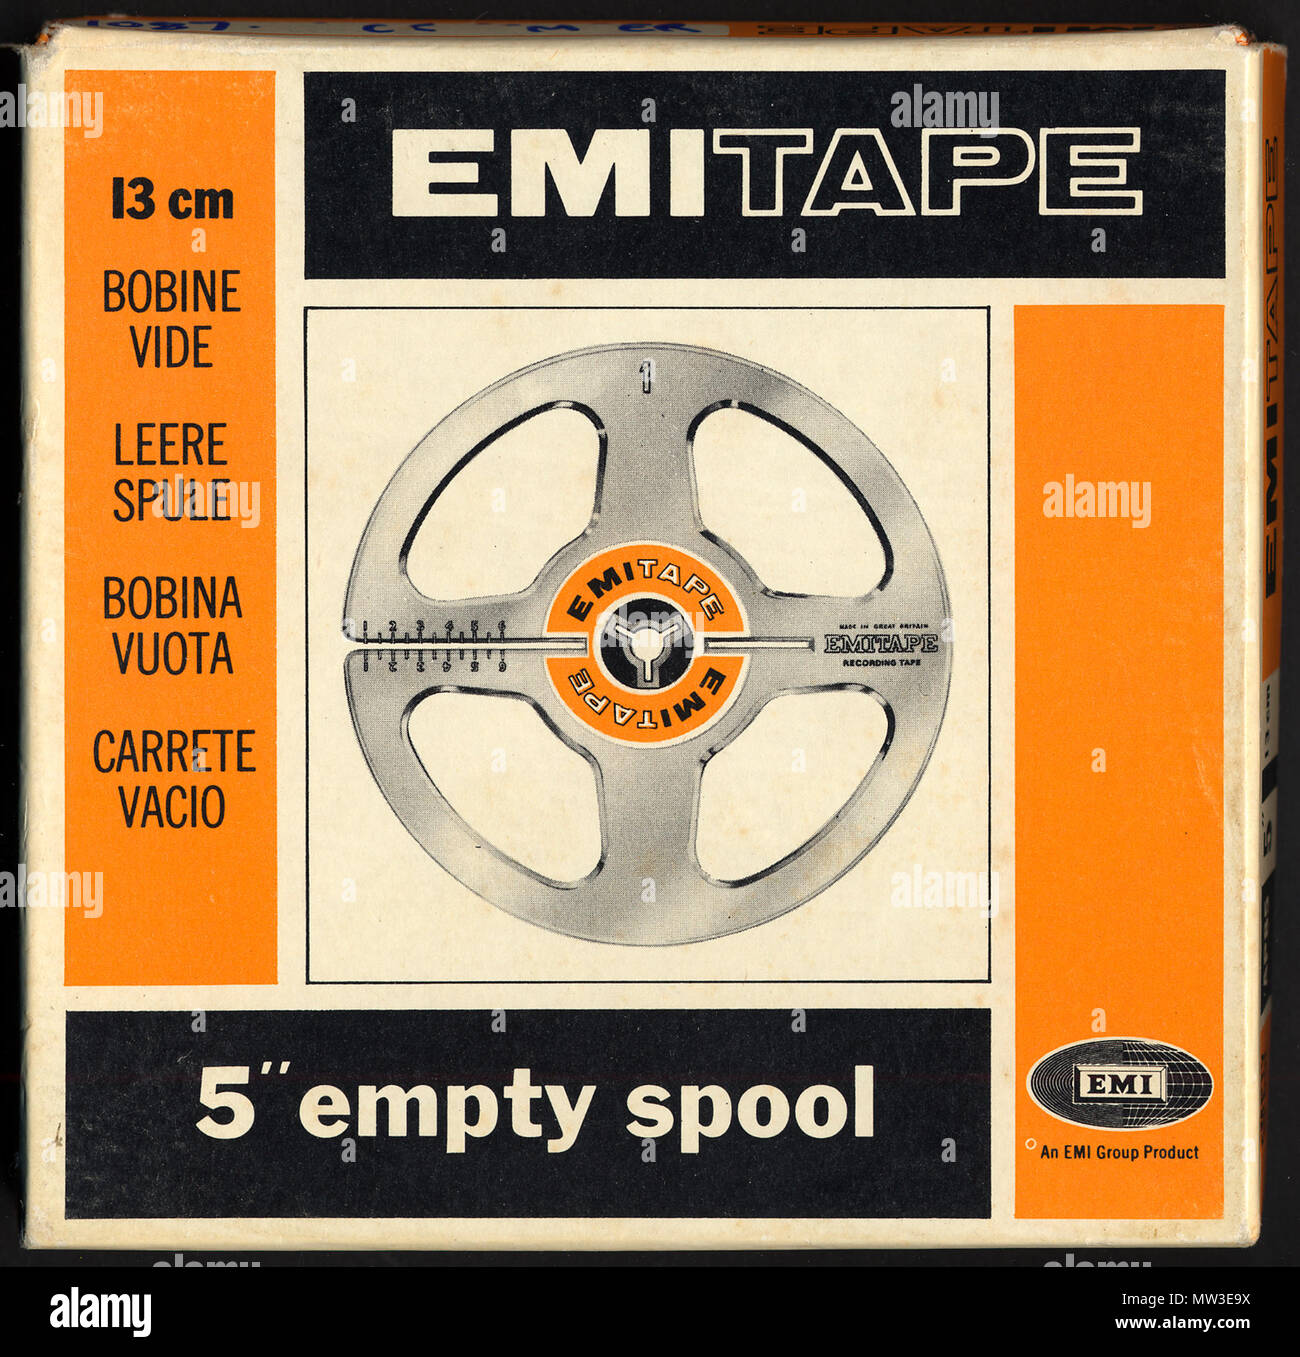 fødselsdag Stræbe amme EMI original reel to reel tape box, 1950s. Reel to reel tape was a popular  home audio format for many years, allowing people to record performances,  plays and assemble soundtracks for the